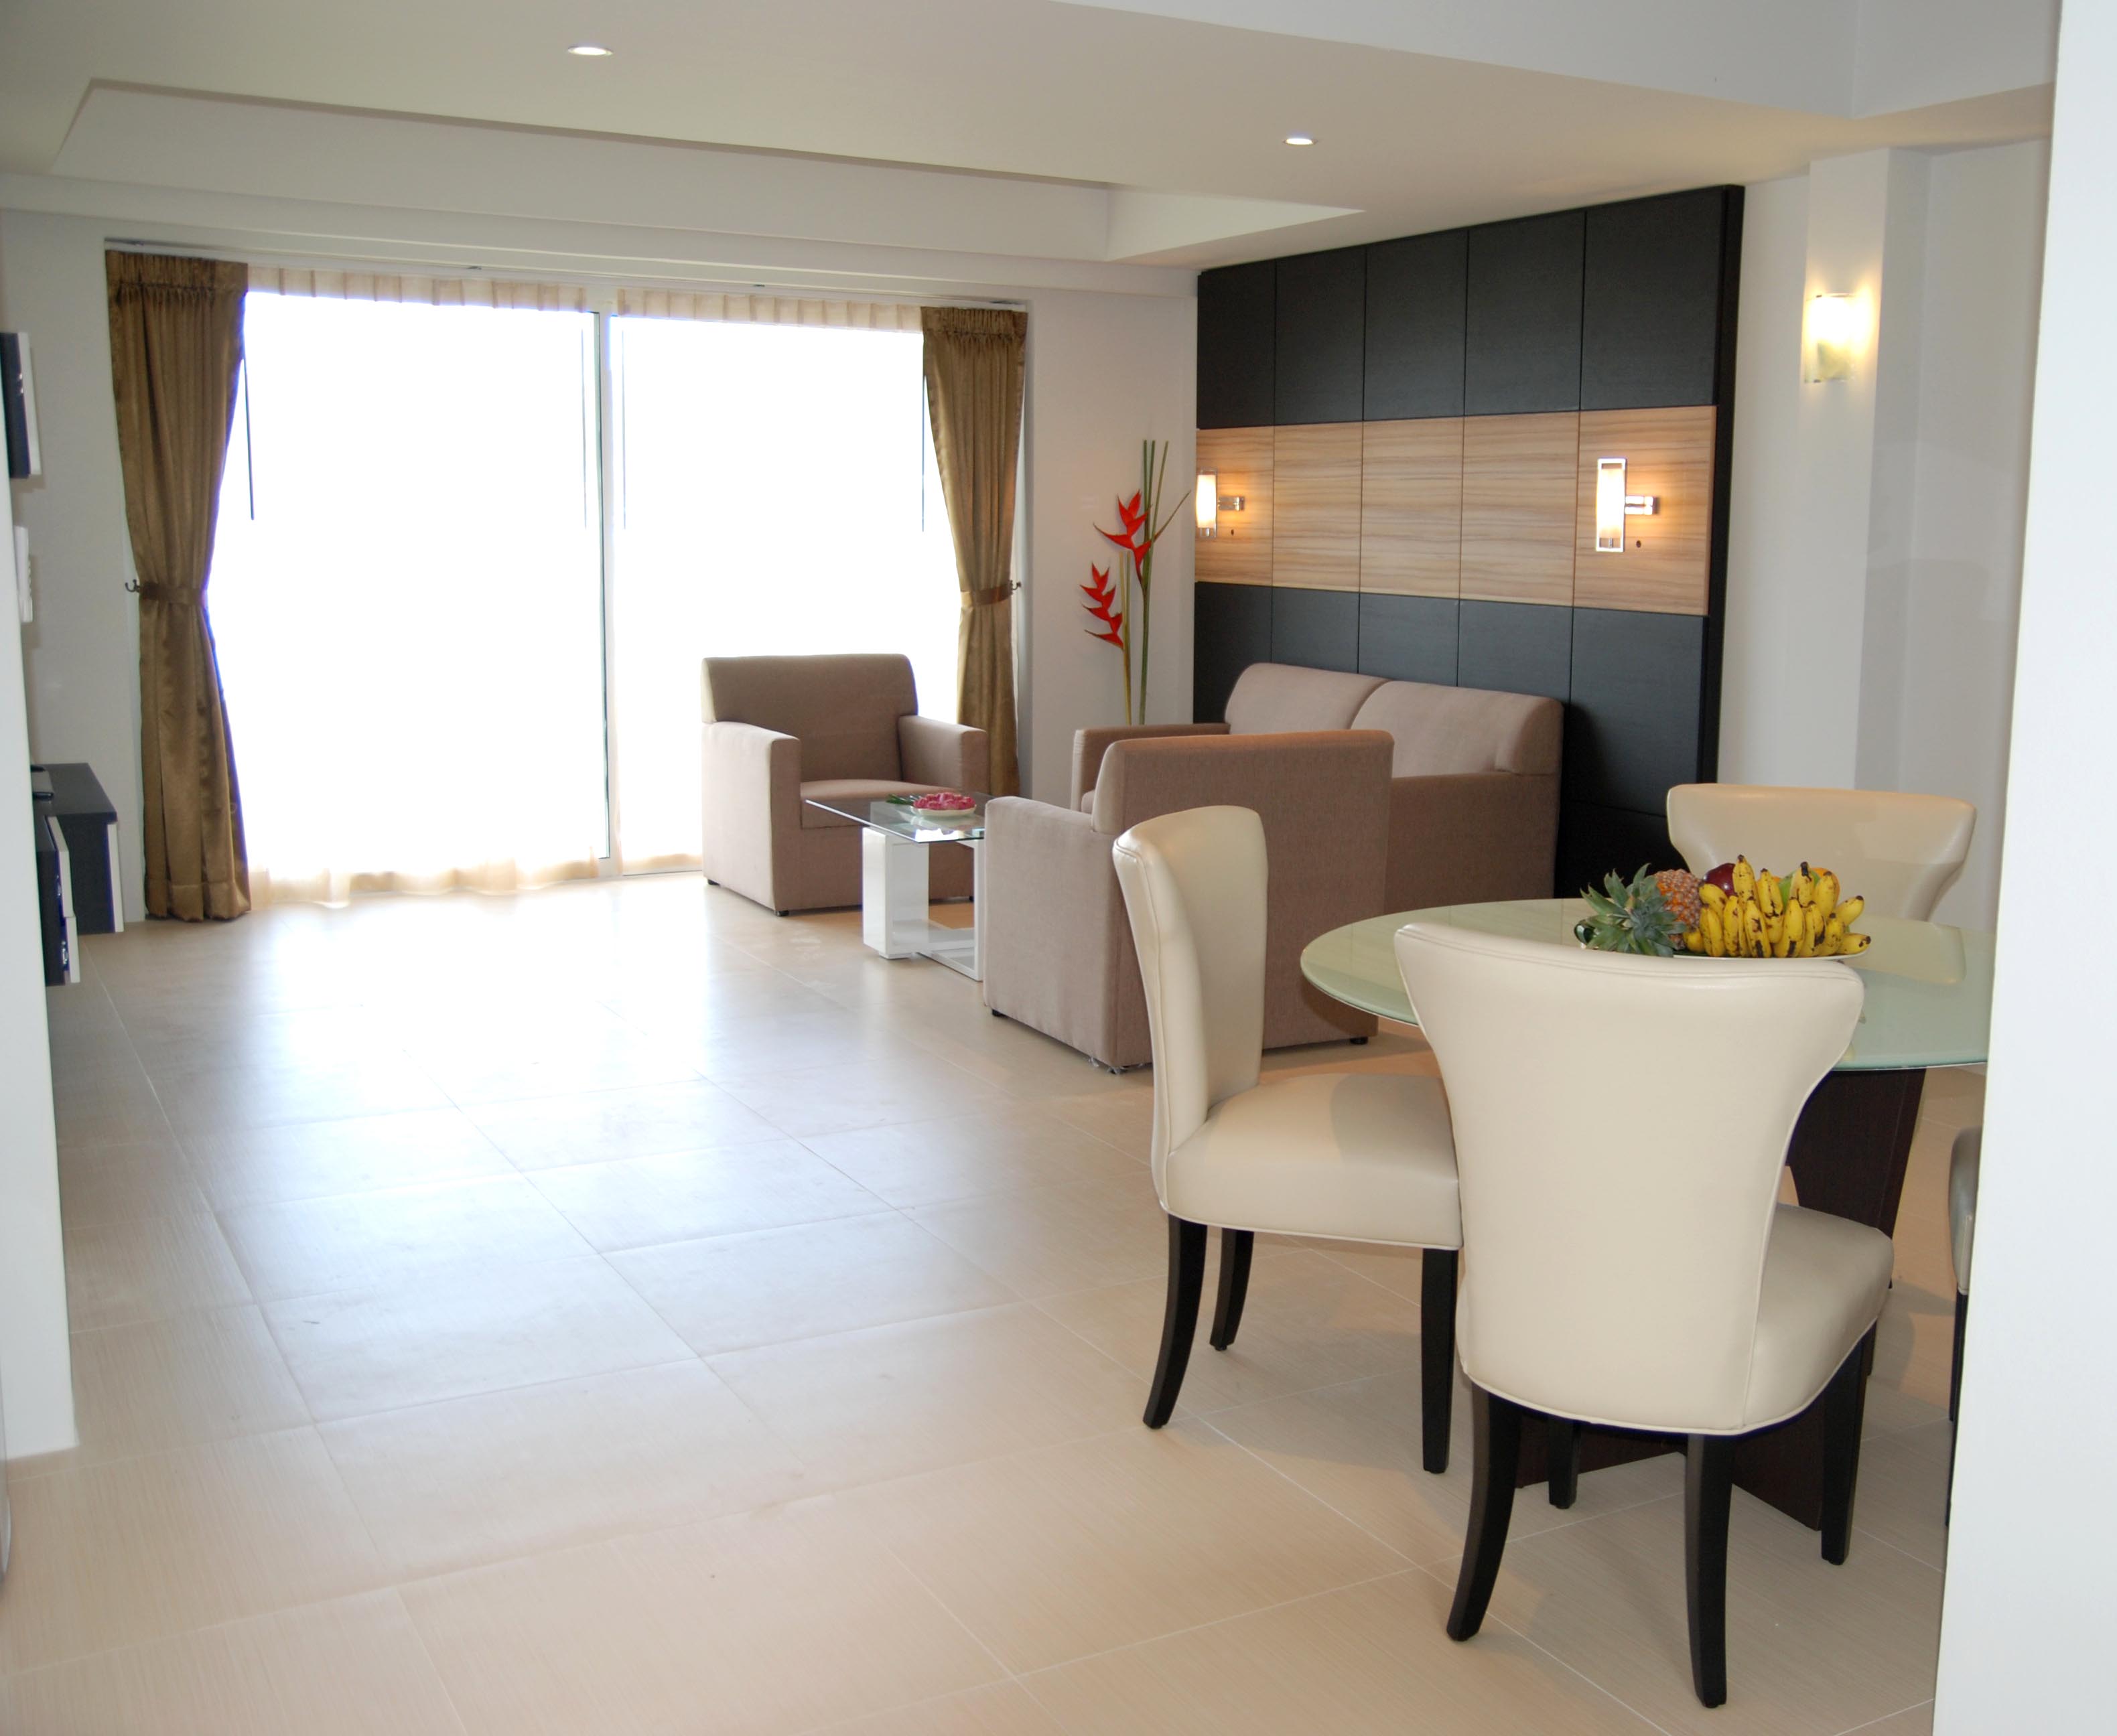 2 bedroom apartment in Patong